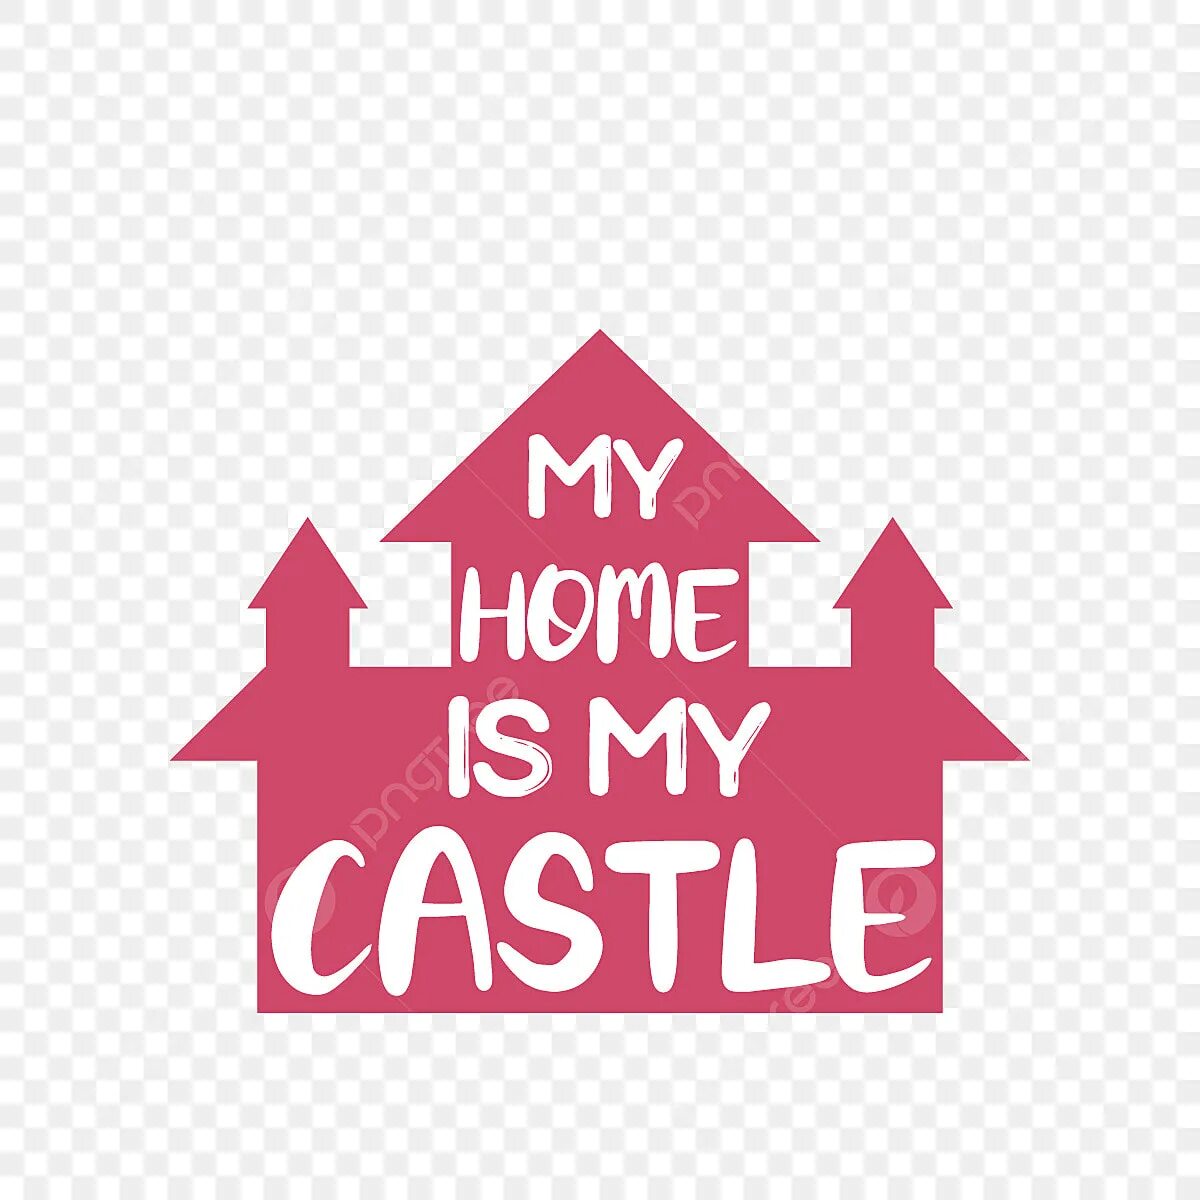 My Home is my Castle. My Home is my Castle картинки. My Home is my Castle надпись. My Home is my Castle игра. My house is my home